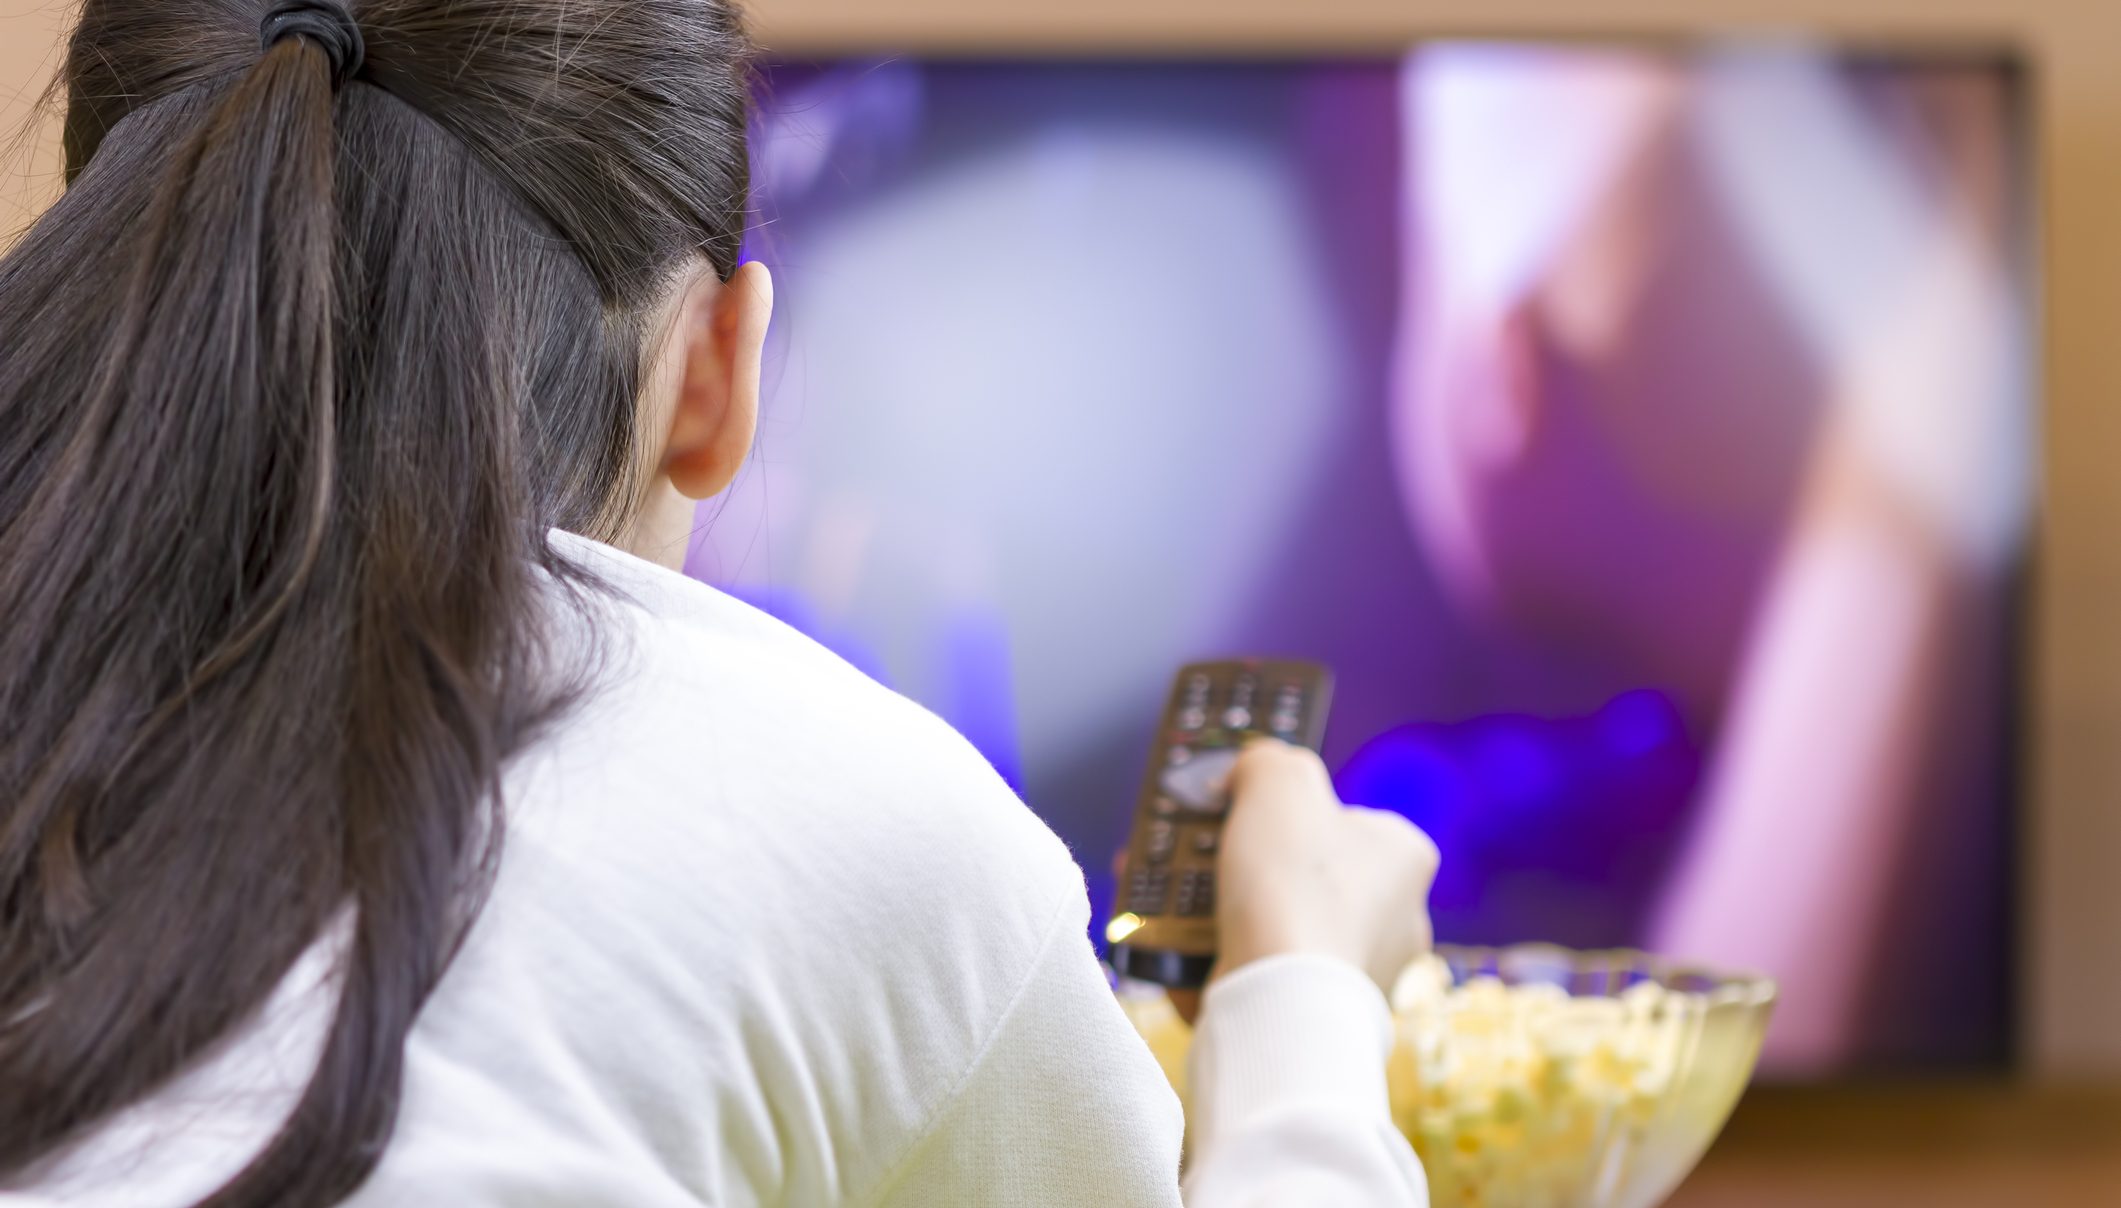 Fewer Americans Are Watching Live TV